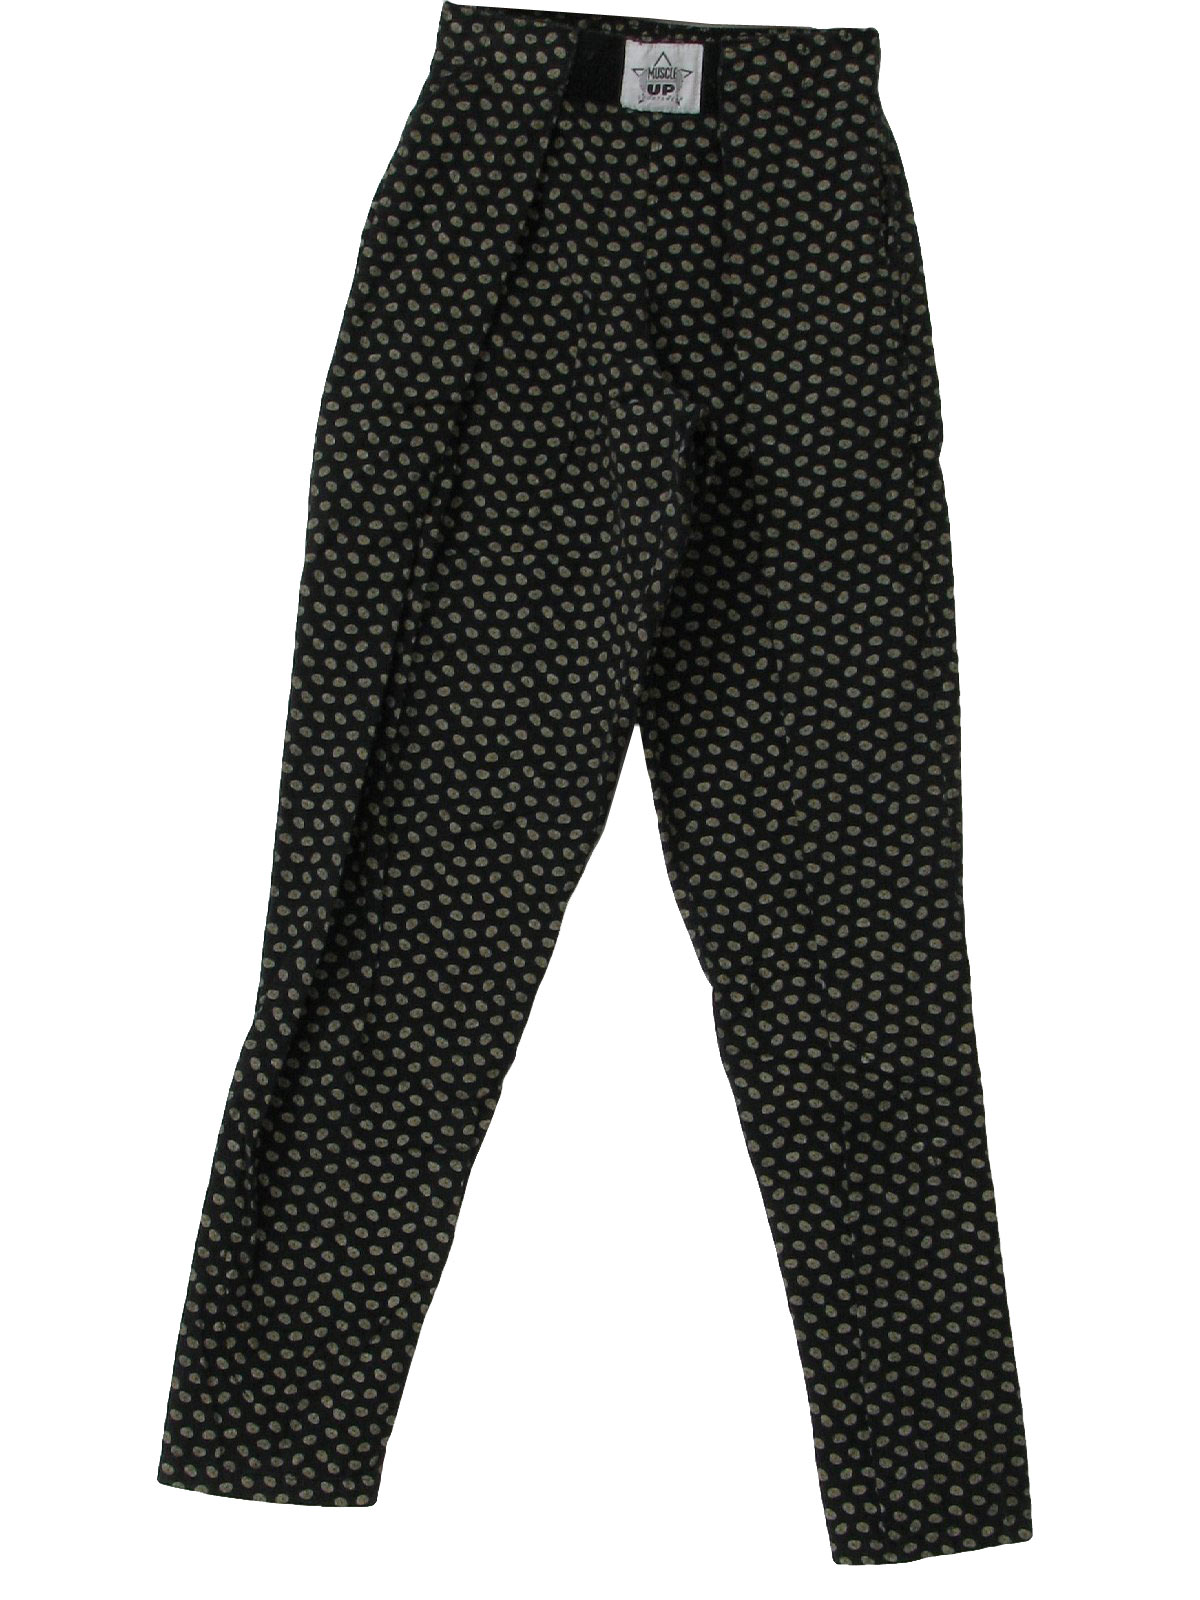 Amazing 80s Pants Vertical Stripe W/ Dots & Squiggles